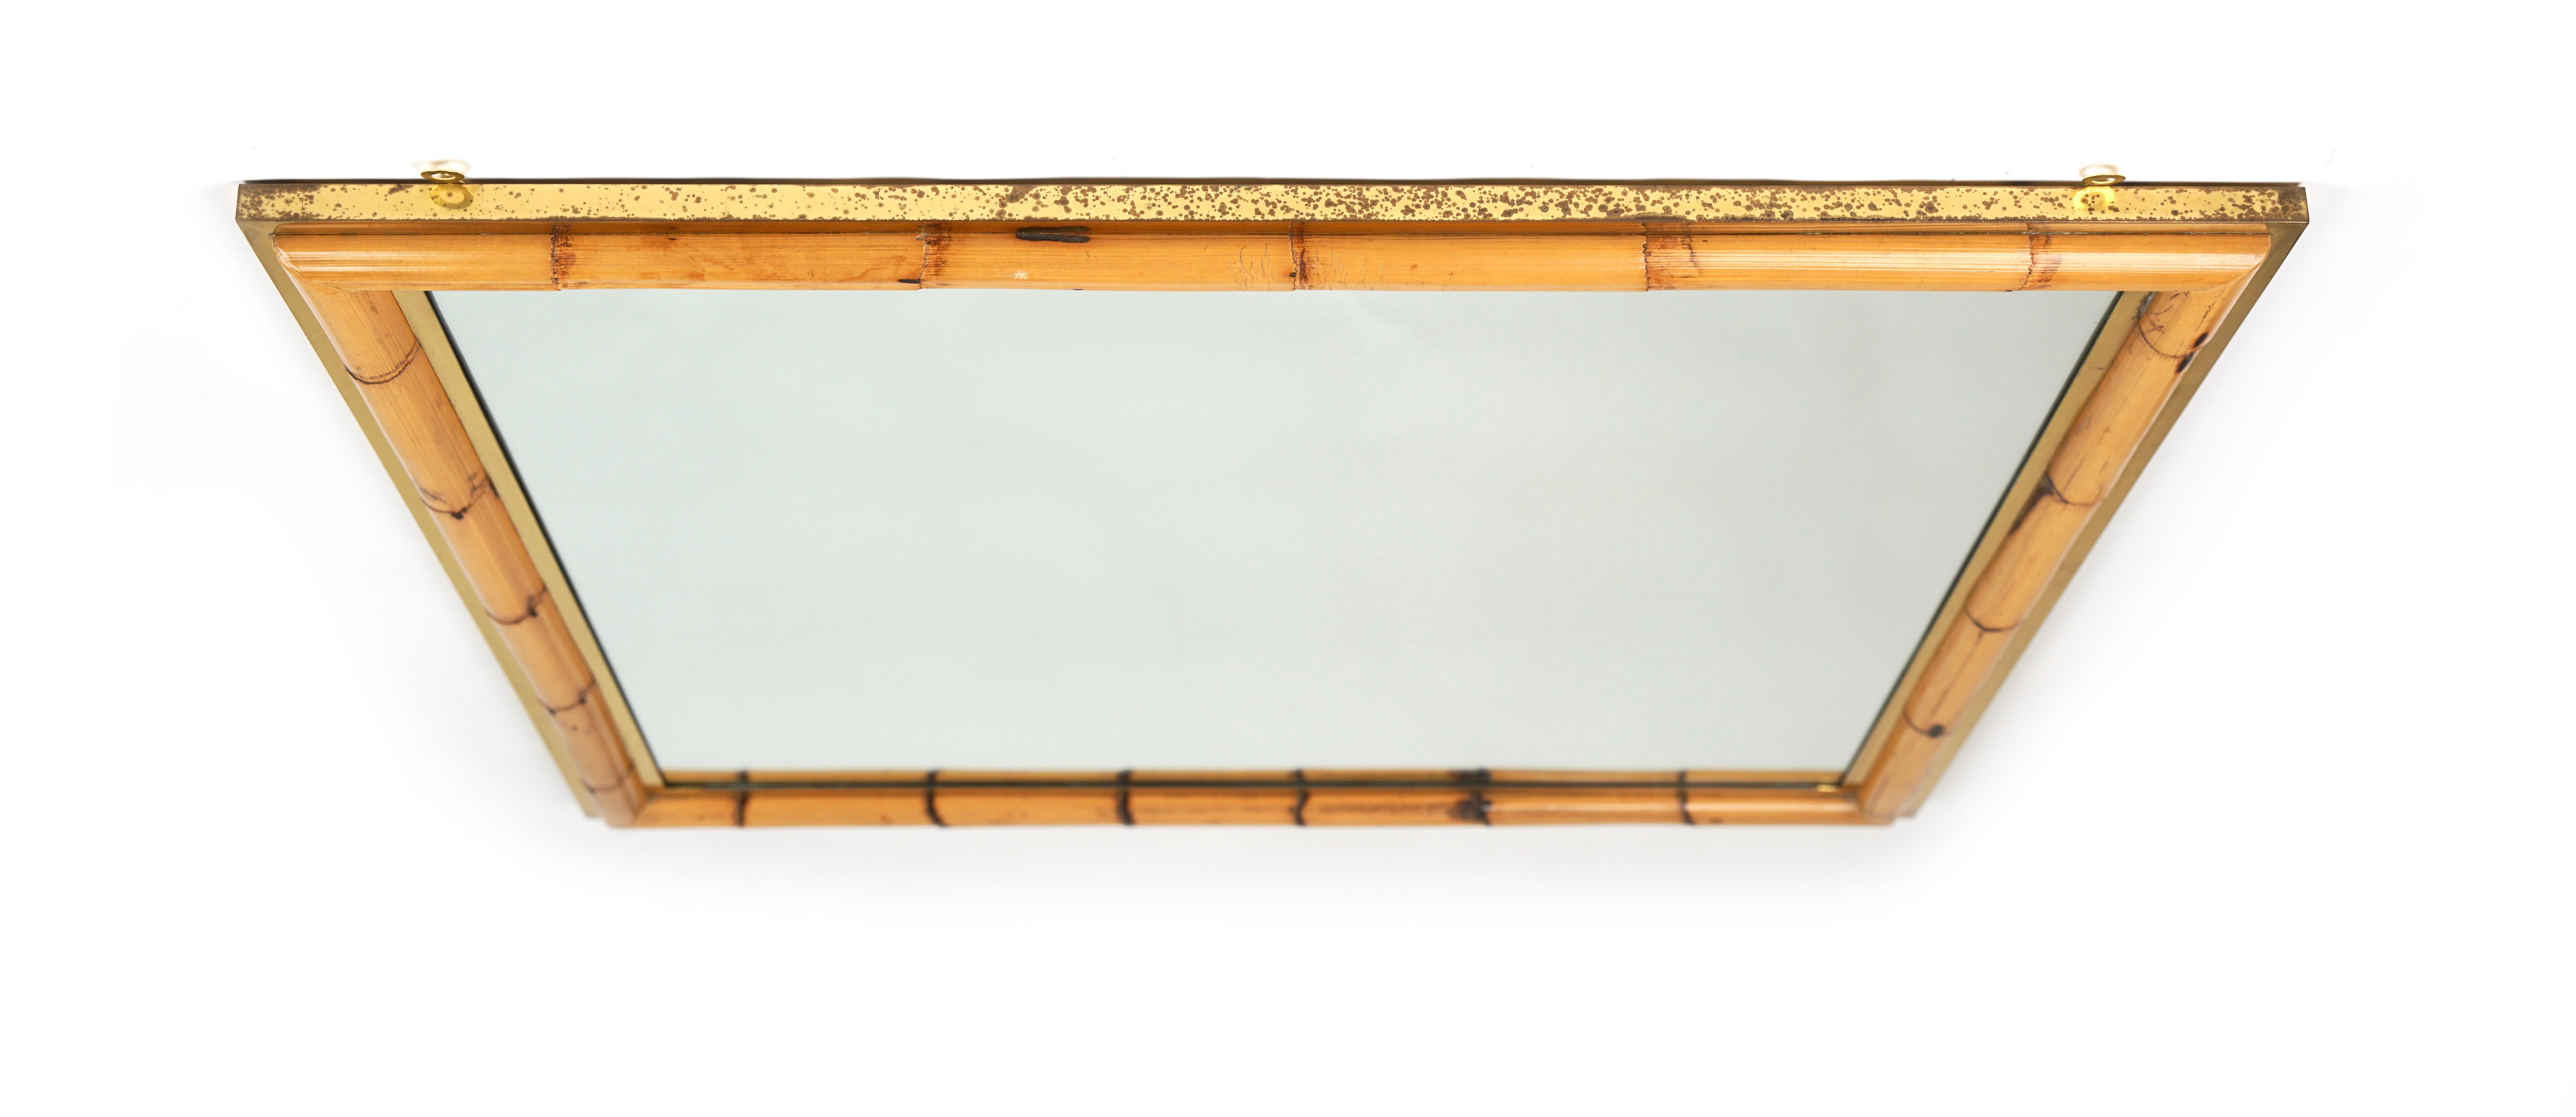 Metal Midcentury Squared Wall Mirror in Brass and Bamboo, Italy, 1970s For Sale